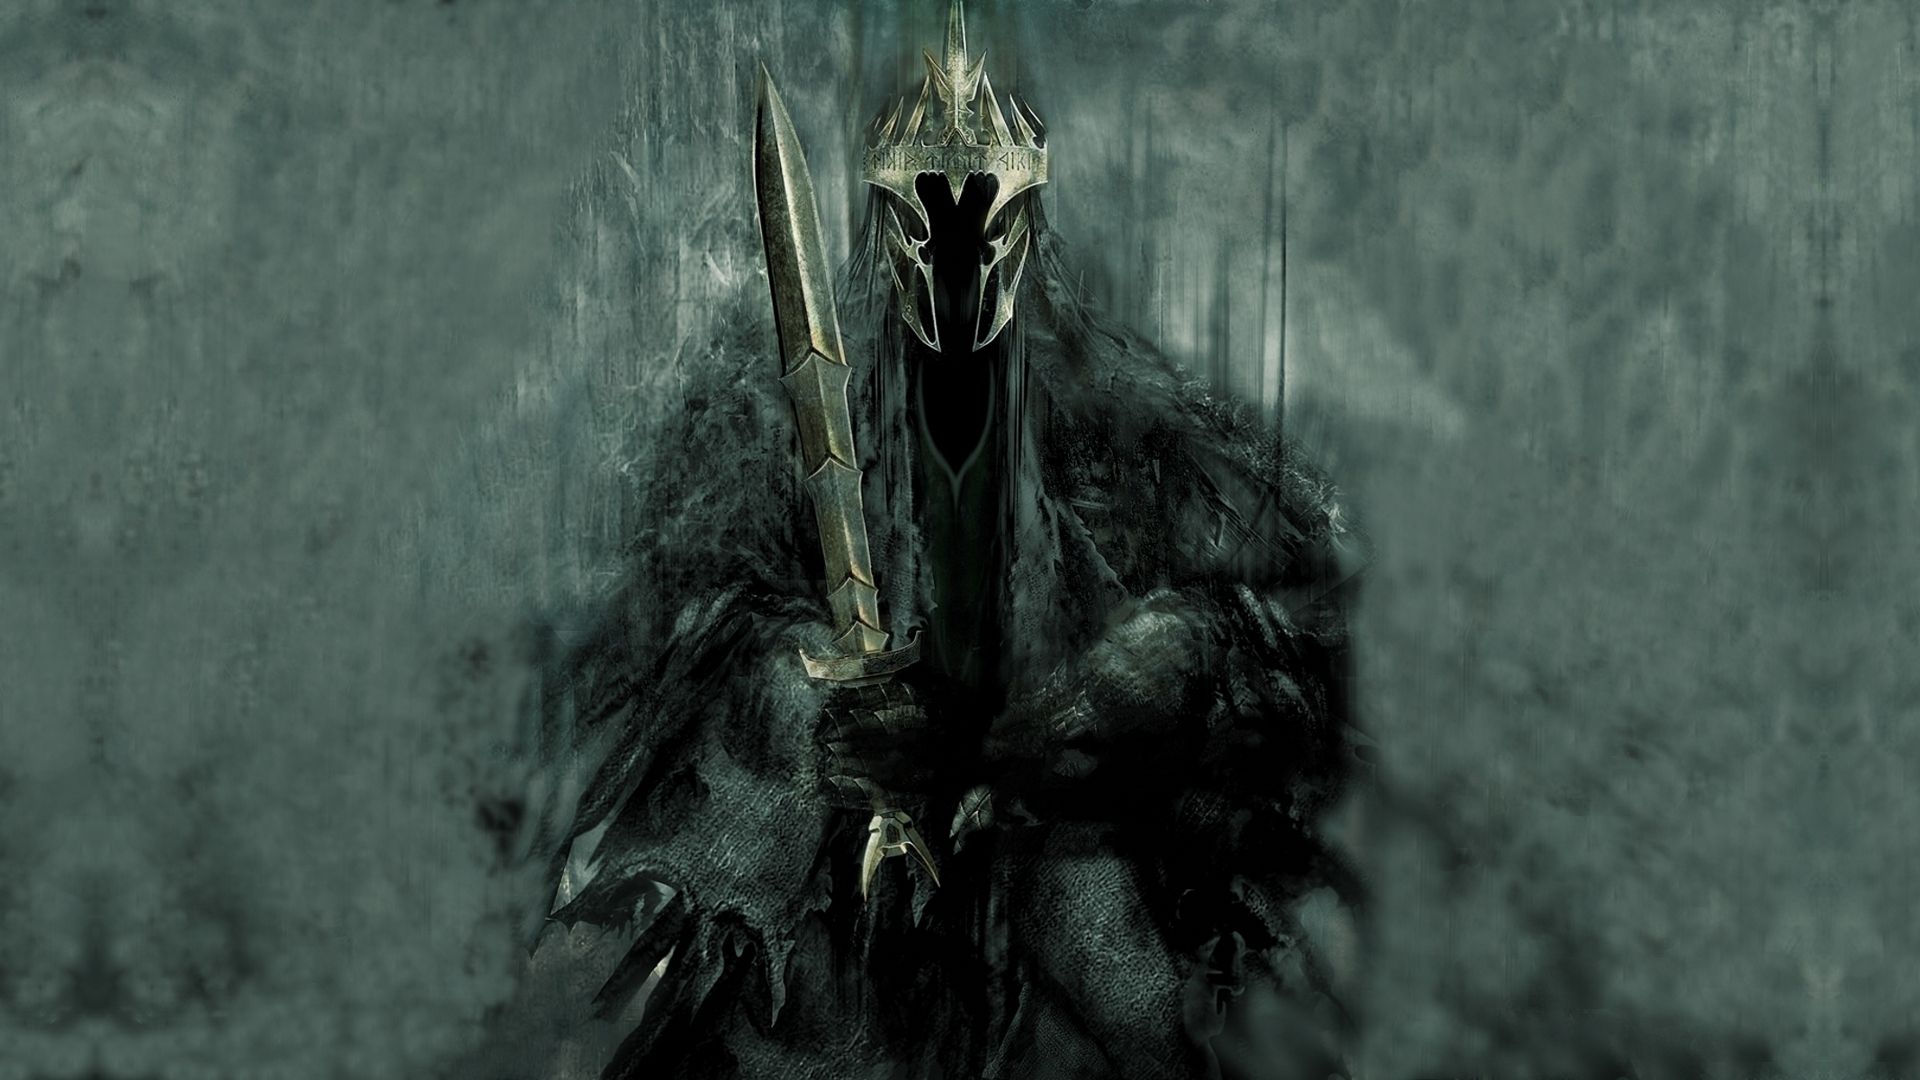 The Witch King Full HD Of The Rings Online: Shadows